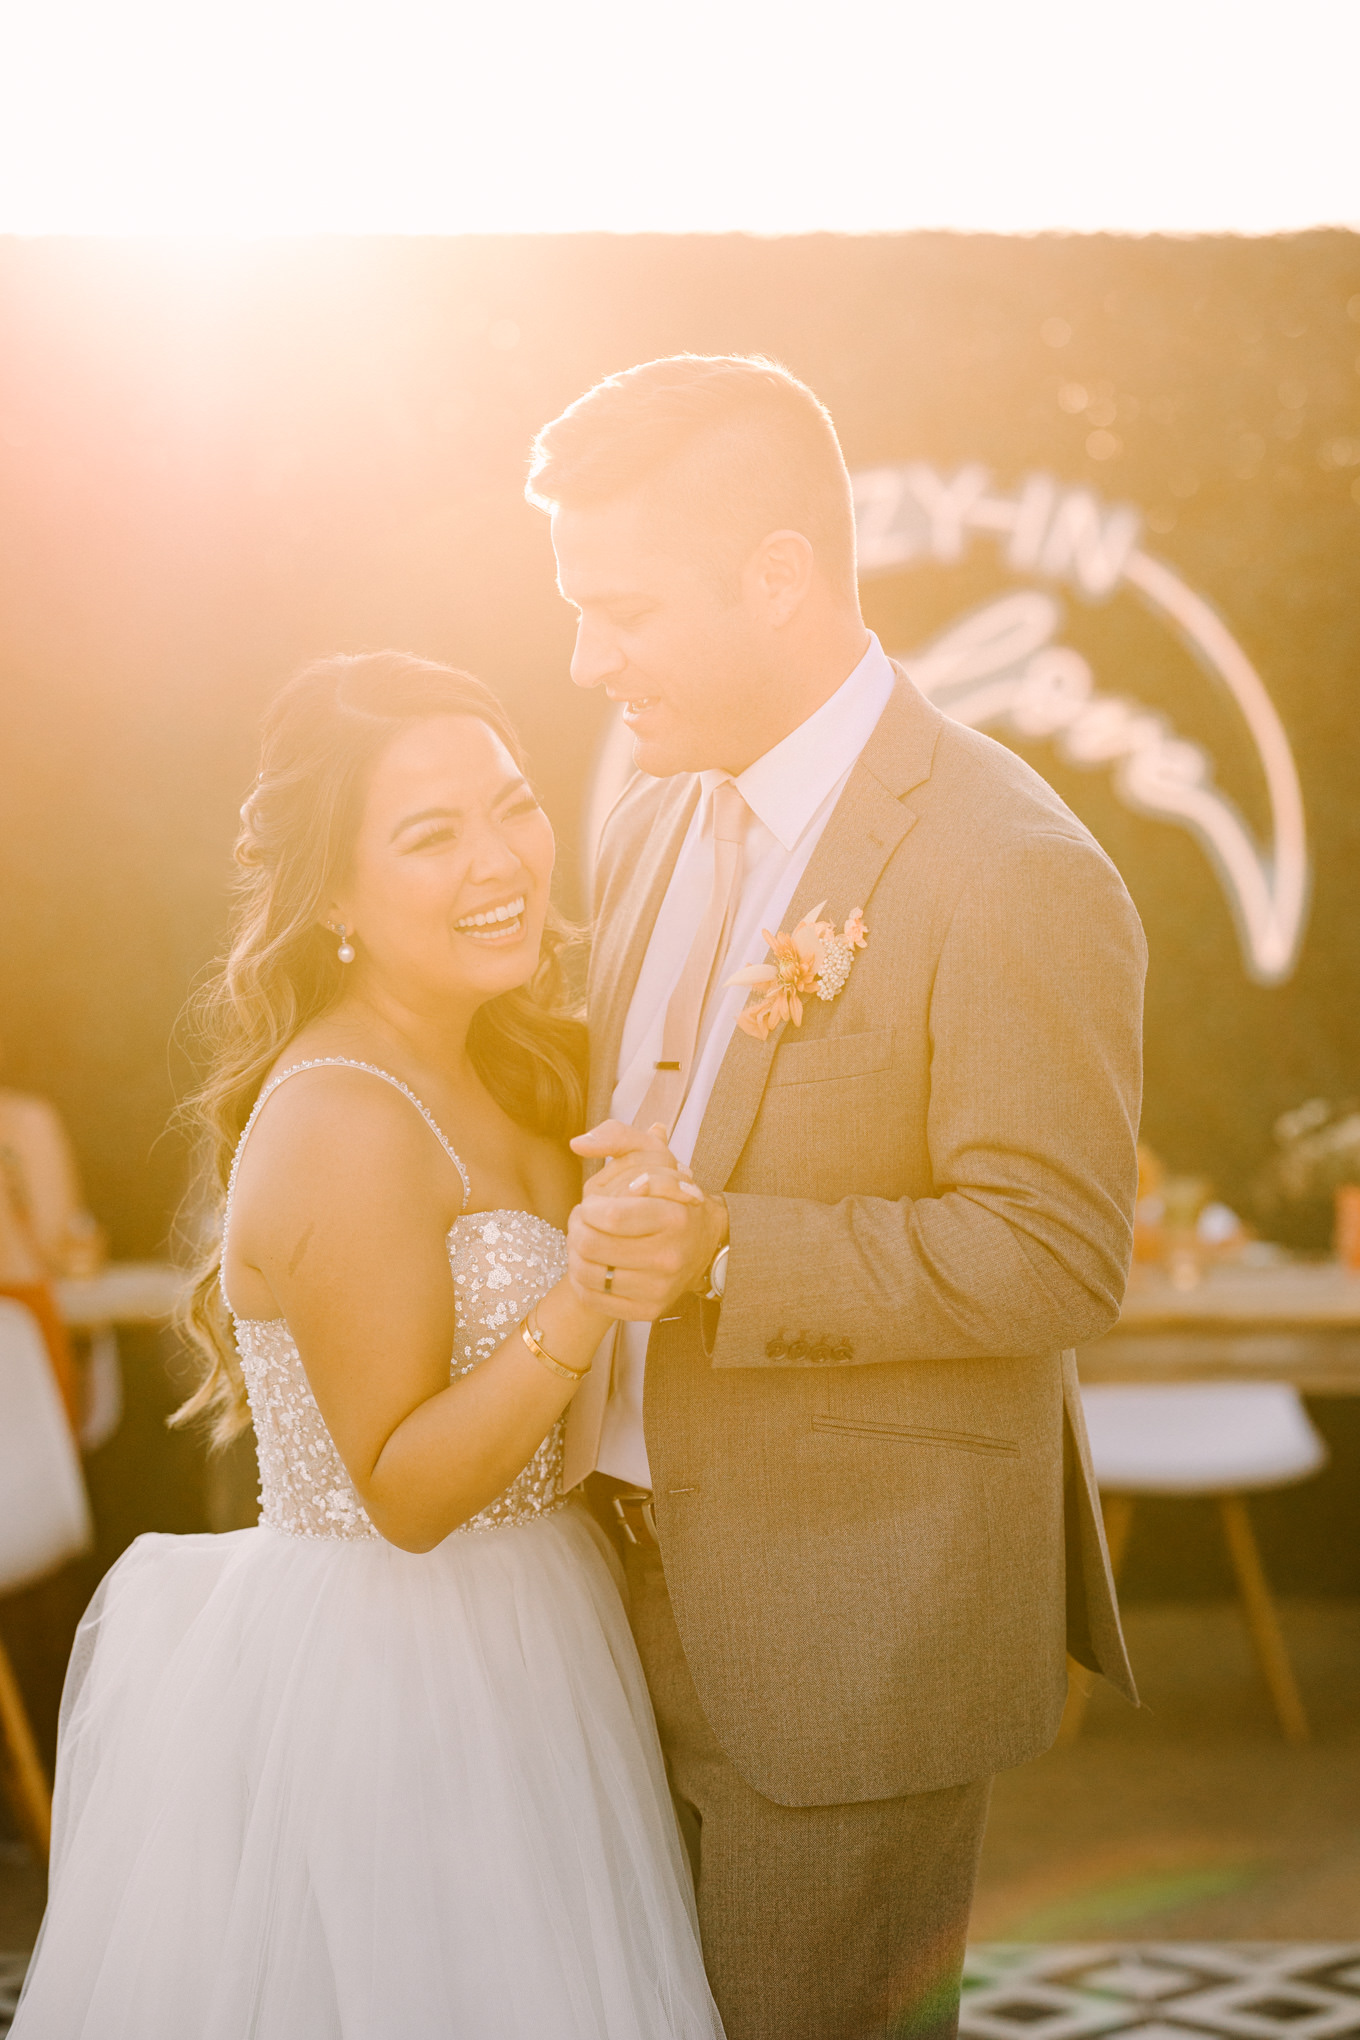 Bride and groom first dance with sun glow | Pink and orange Lautner Compound wedding | Colorful Palm Springs wedding photography | #palmspringsphotographer #palmspringswedding #lautnercompound #southerncaliforniawedding  Source: Mary Costa Photography | Los Angeles